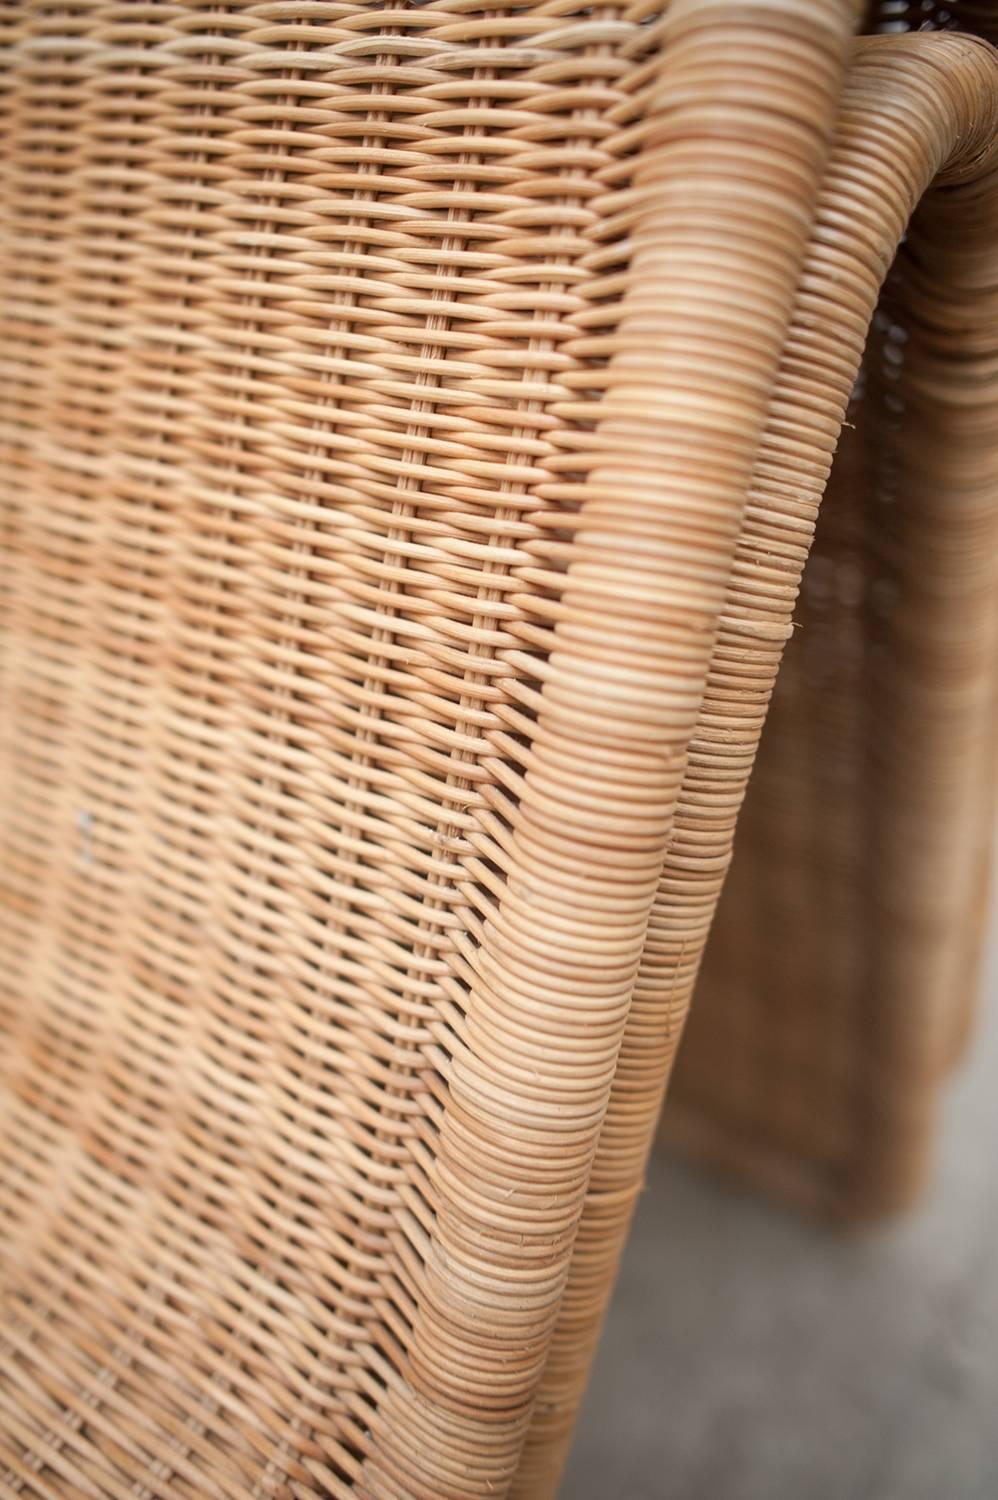 Hand-Woven Pair of Wicker Lounge Chairs by Tito Agnoli Model P3 for Bonacina, Italy, 1970s